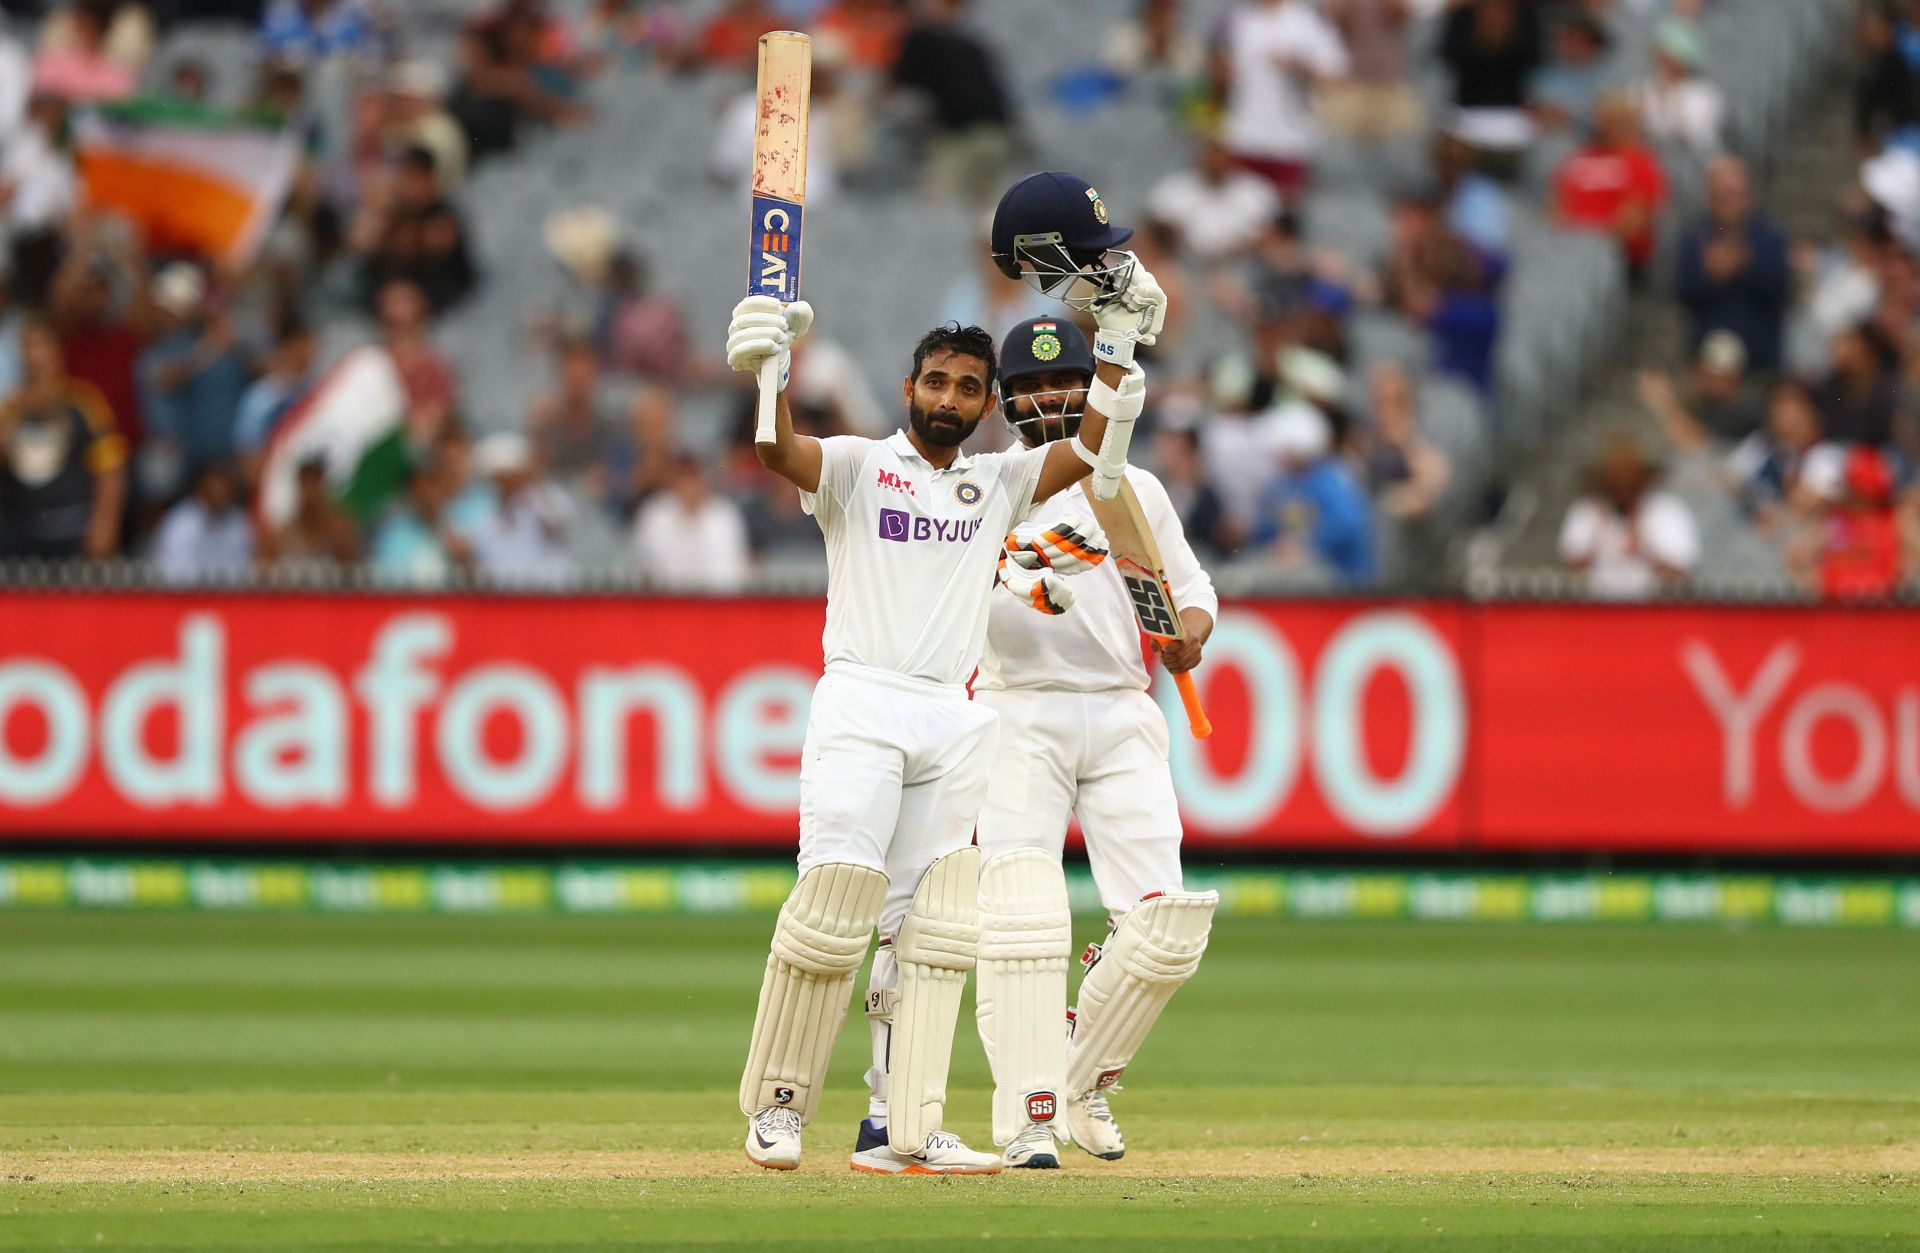 Ajinkya Rahane celebrates his famous hundred in the 2020 MCG Test. (Pic: Getty Images)